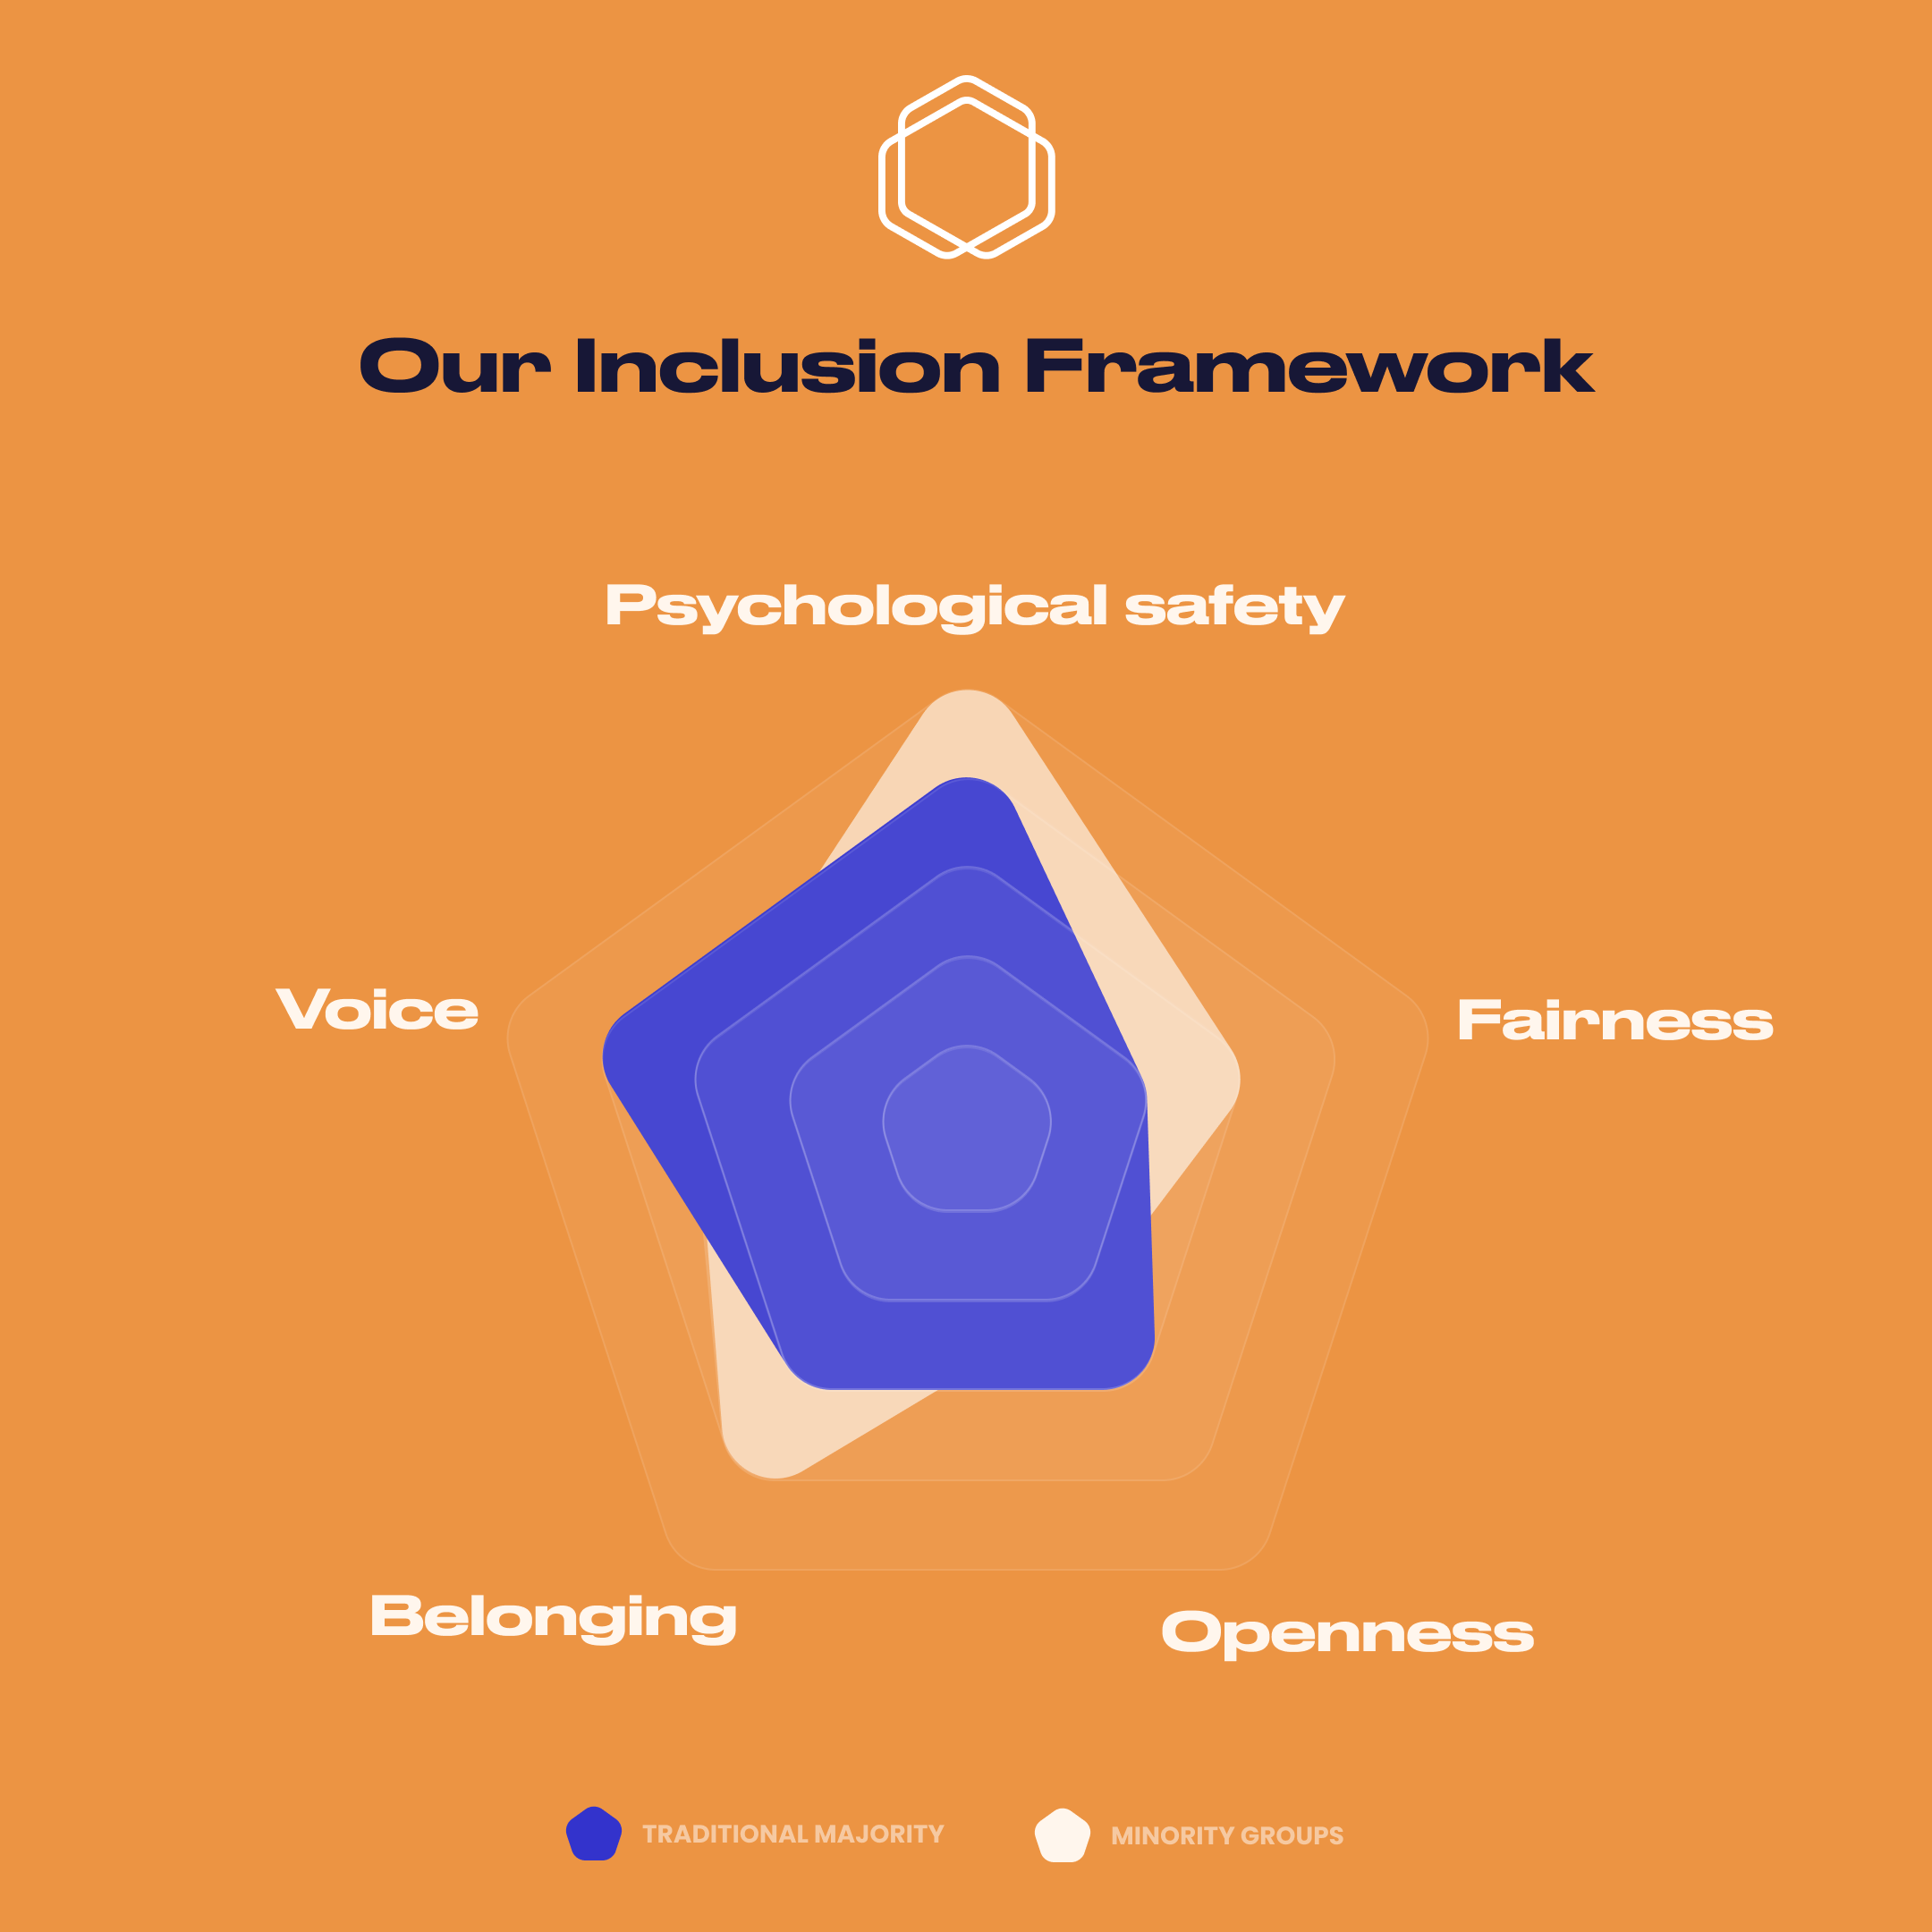 A graphic demonstrating Fair HQ's inclusion framework with 5 dimensions: belonging, psychological safety, openness, voice and fairness.